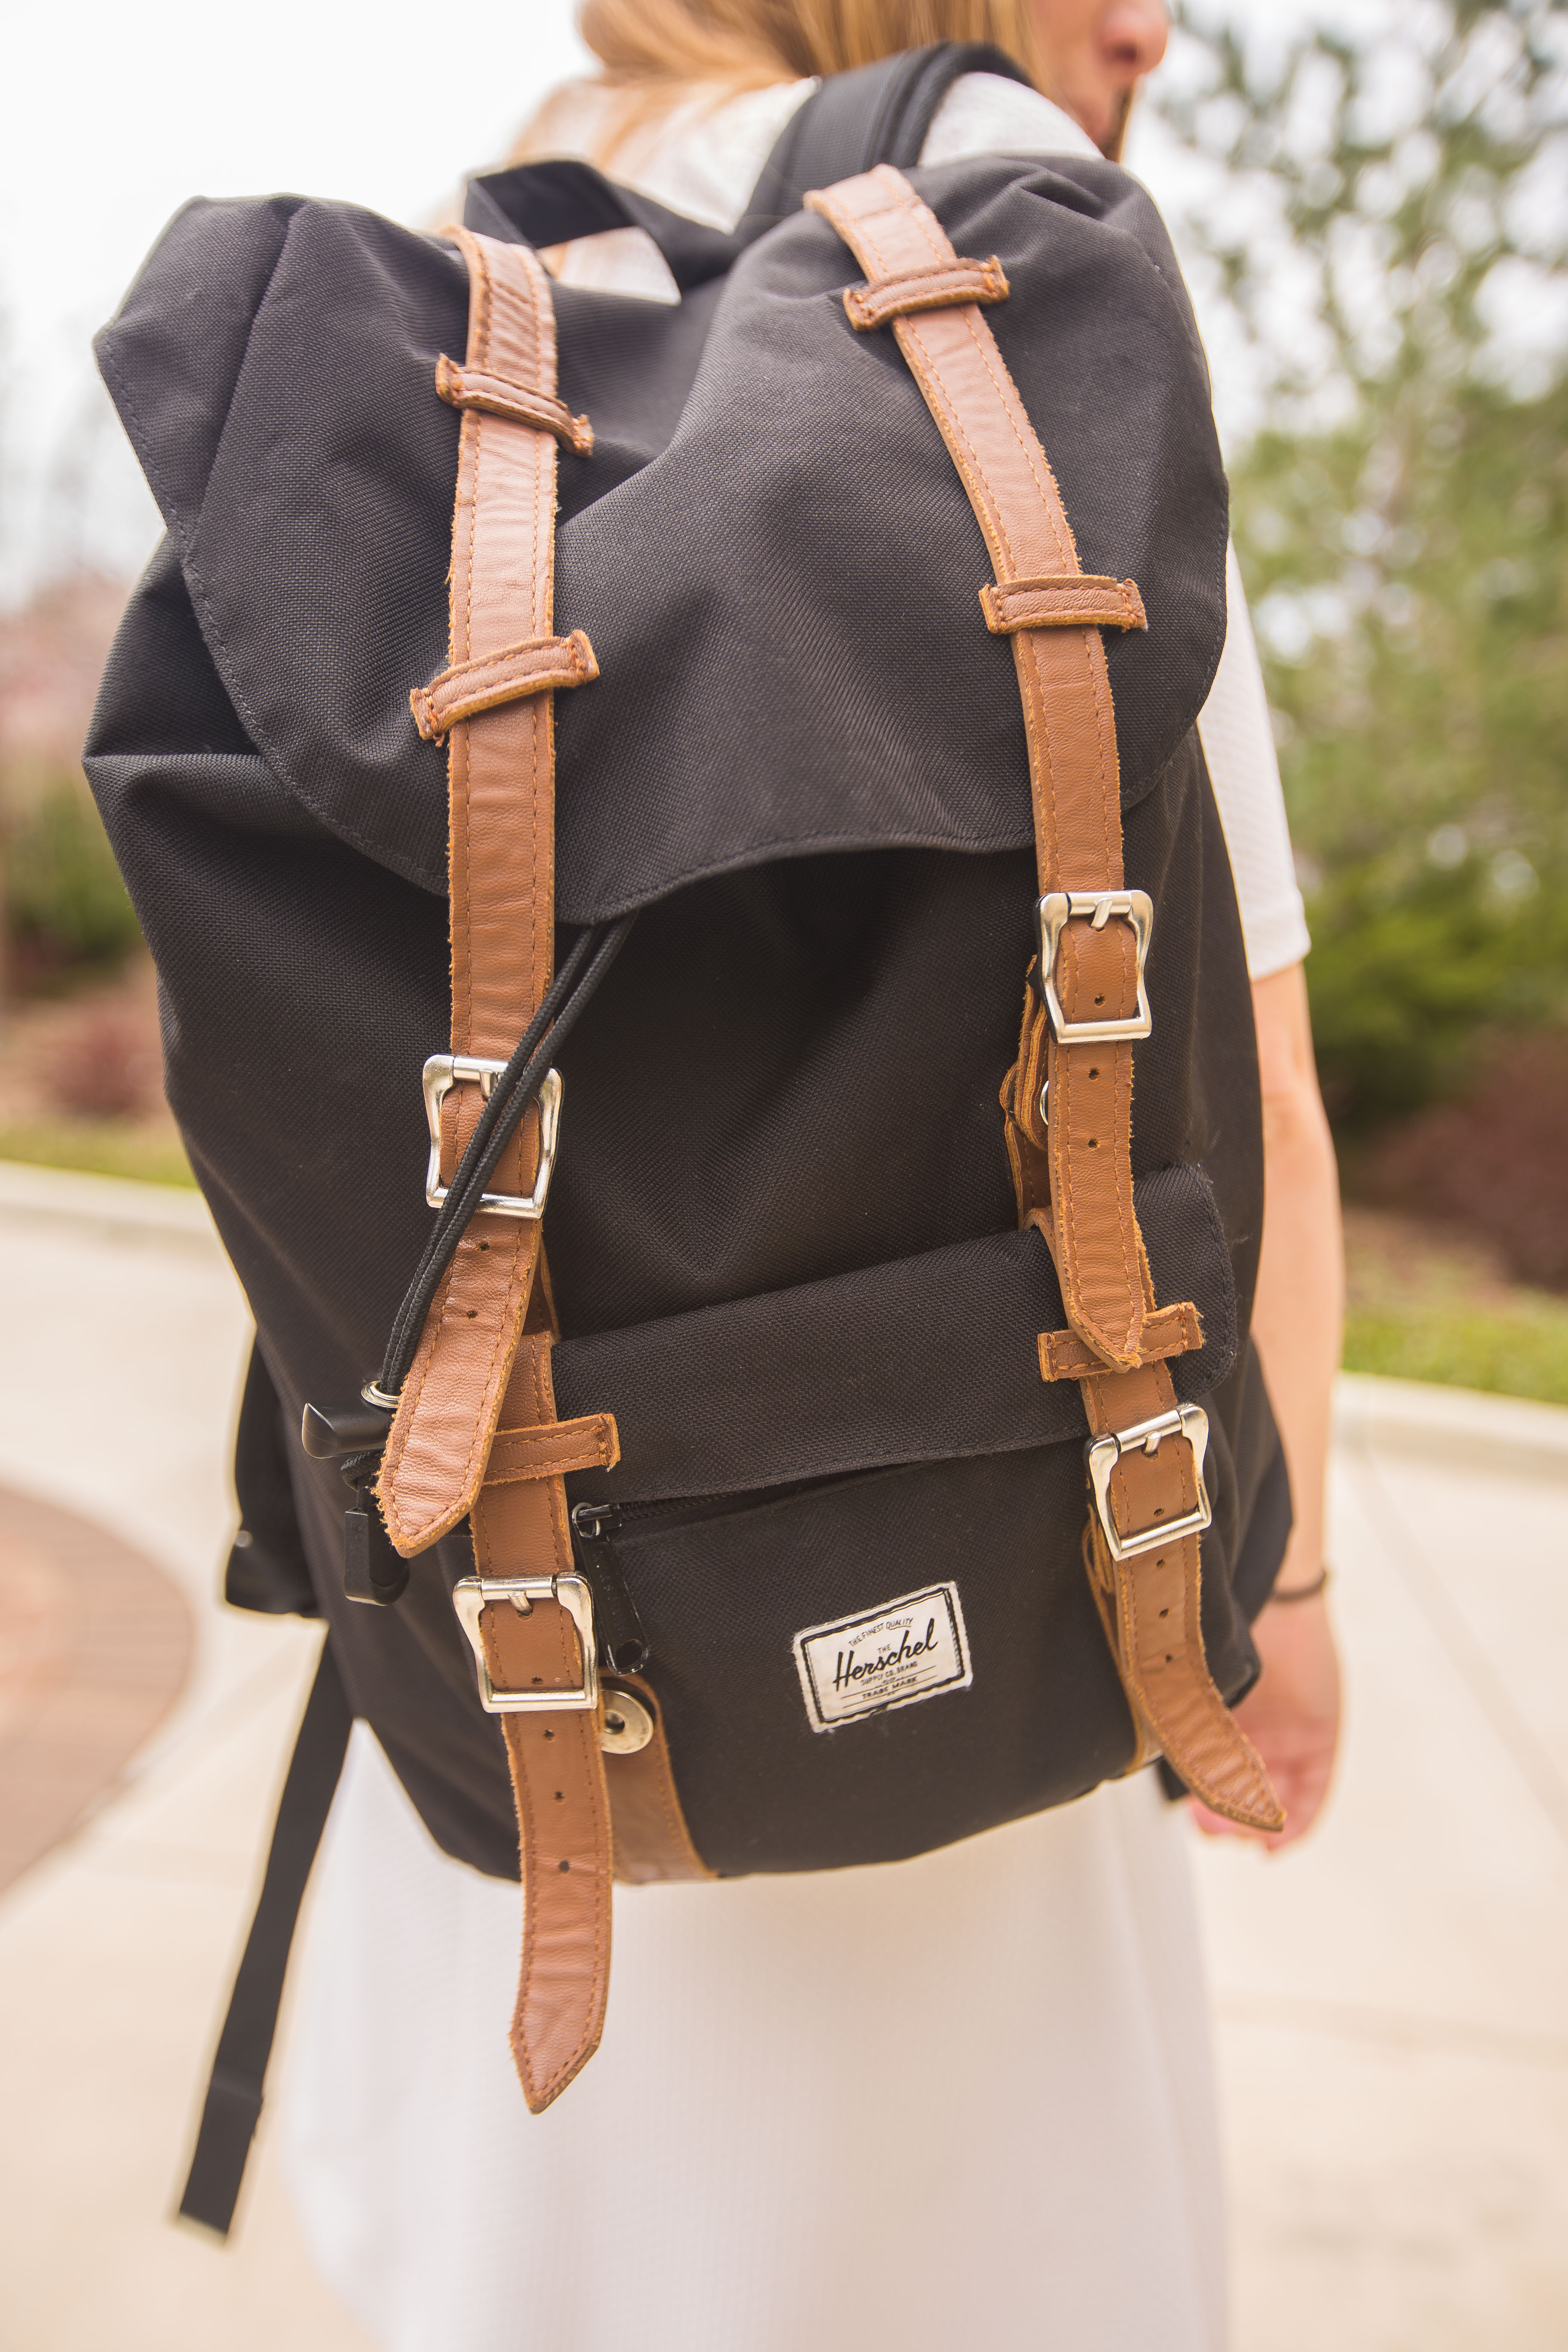 10 popular backpacks brands on campus The Daily Universe